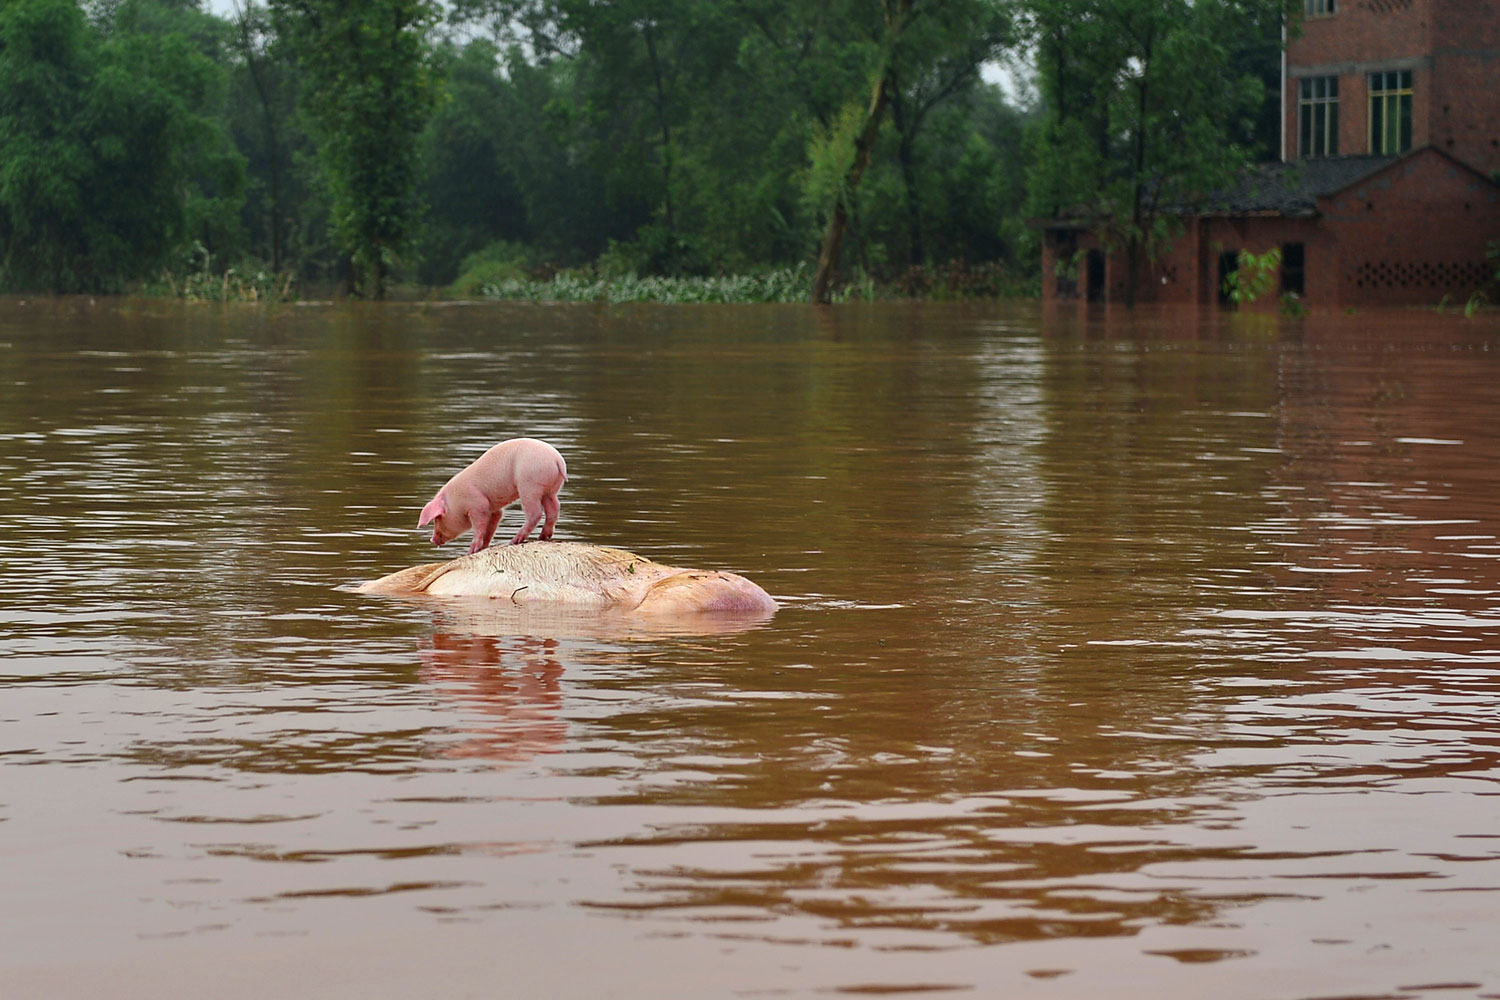 July 2, 2013. A piglet stands on a dead sow floating in floodwaters in Chongqing, China. More than 18,000 people were evacuated after rainstorms hit Tongnan county and triggered serious flooding.